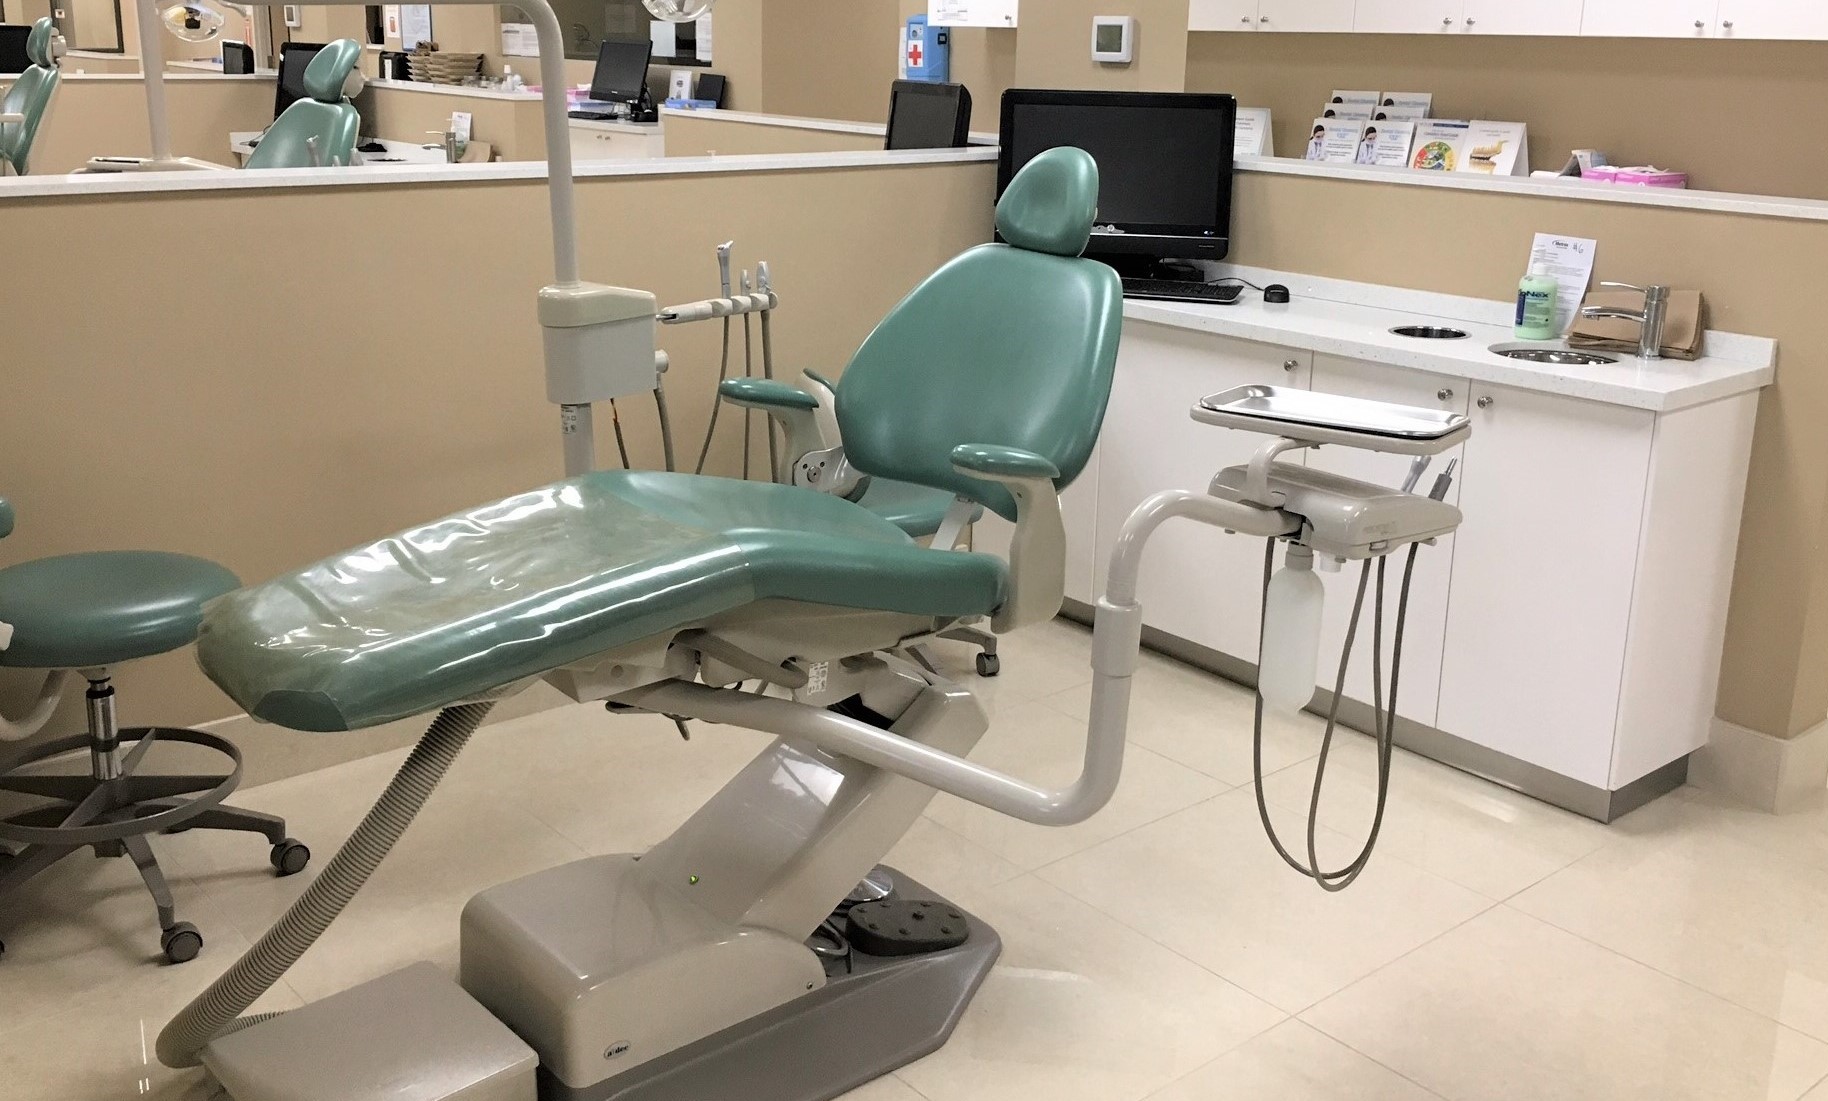 Vancouver College of Dental Hygiene student lounge interior